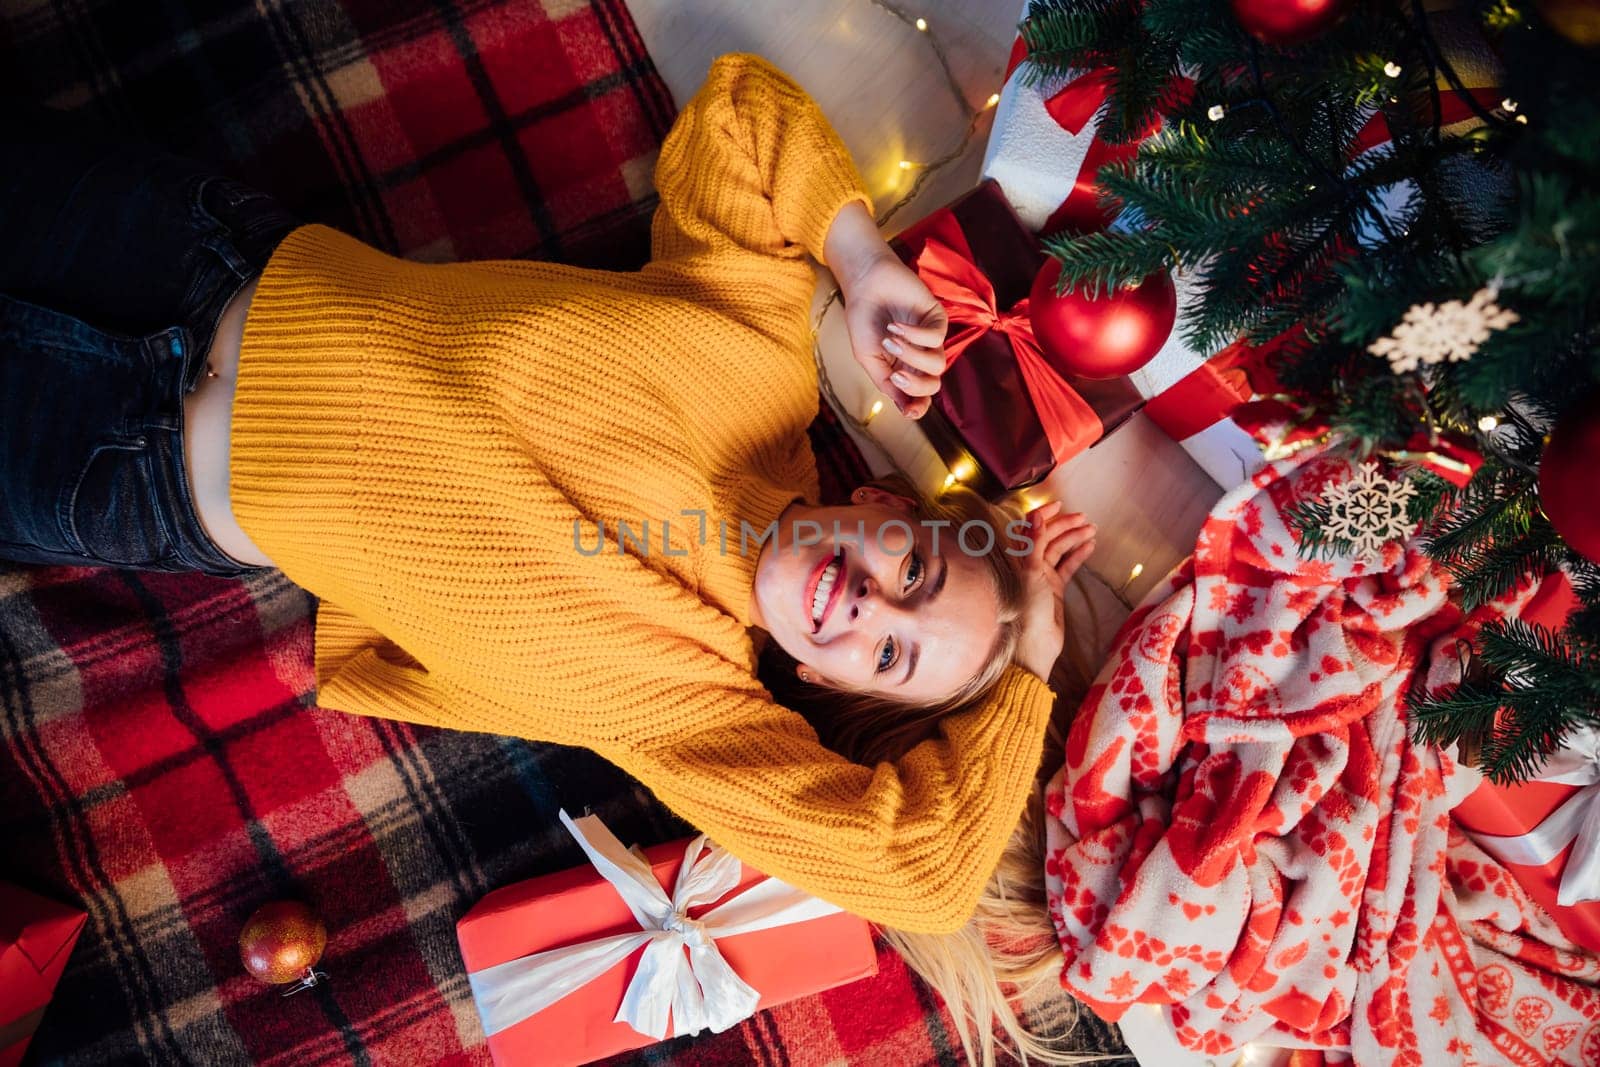 woman at christmas tree with gifts for new year